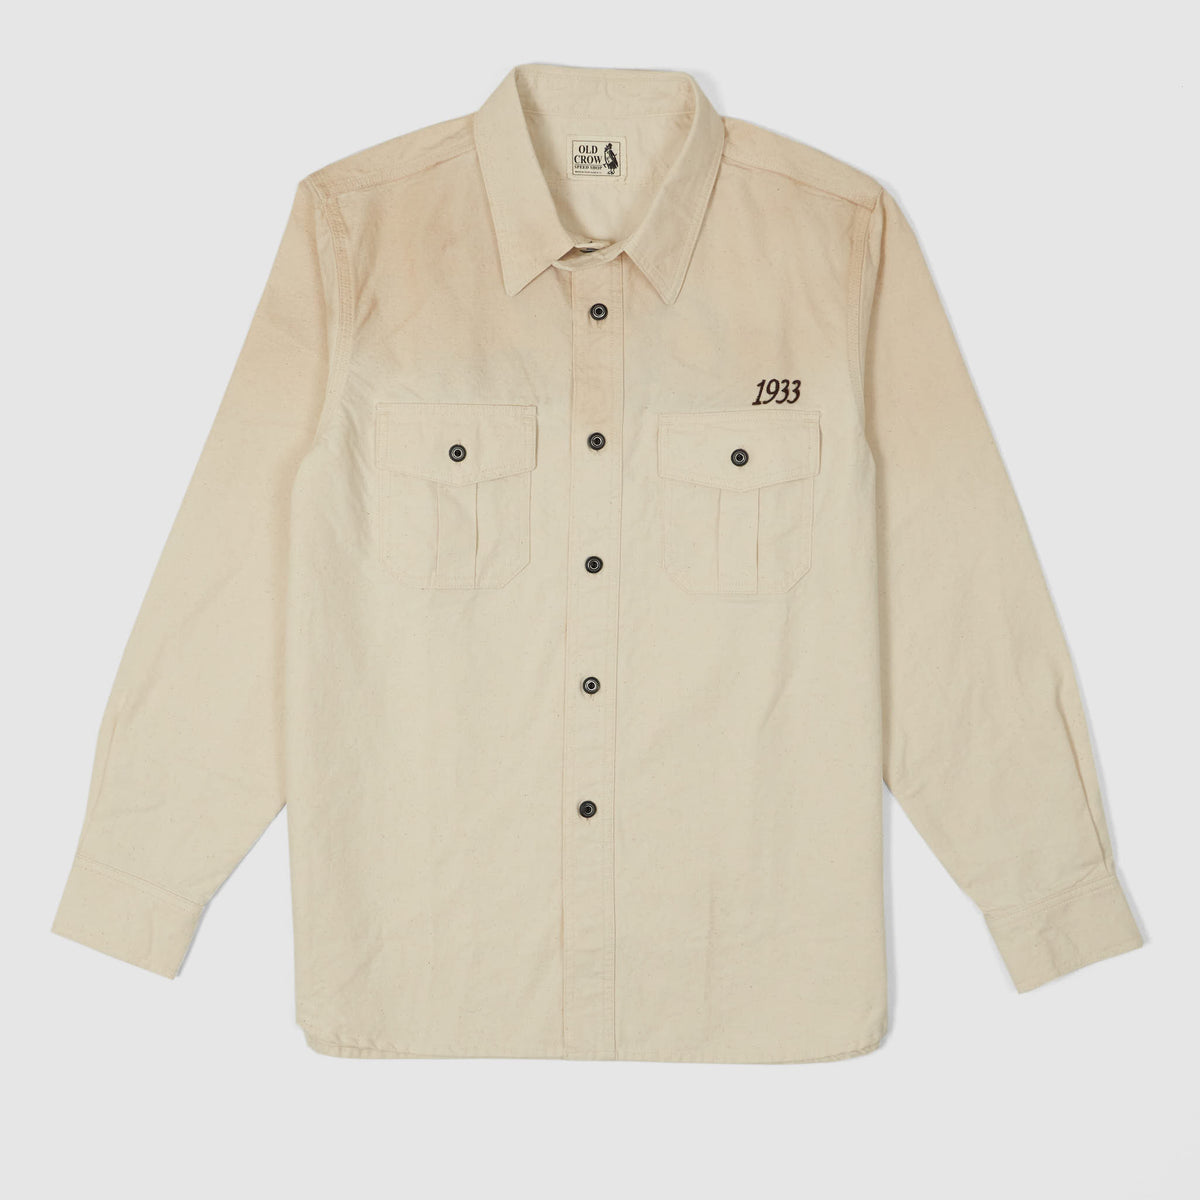 Old Crow Speed Shop by Glad Hand &amp; Co. Embroidered Work Shirt